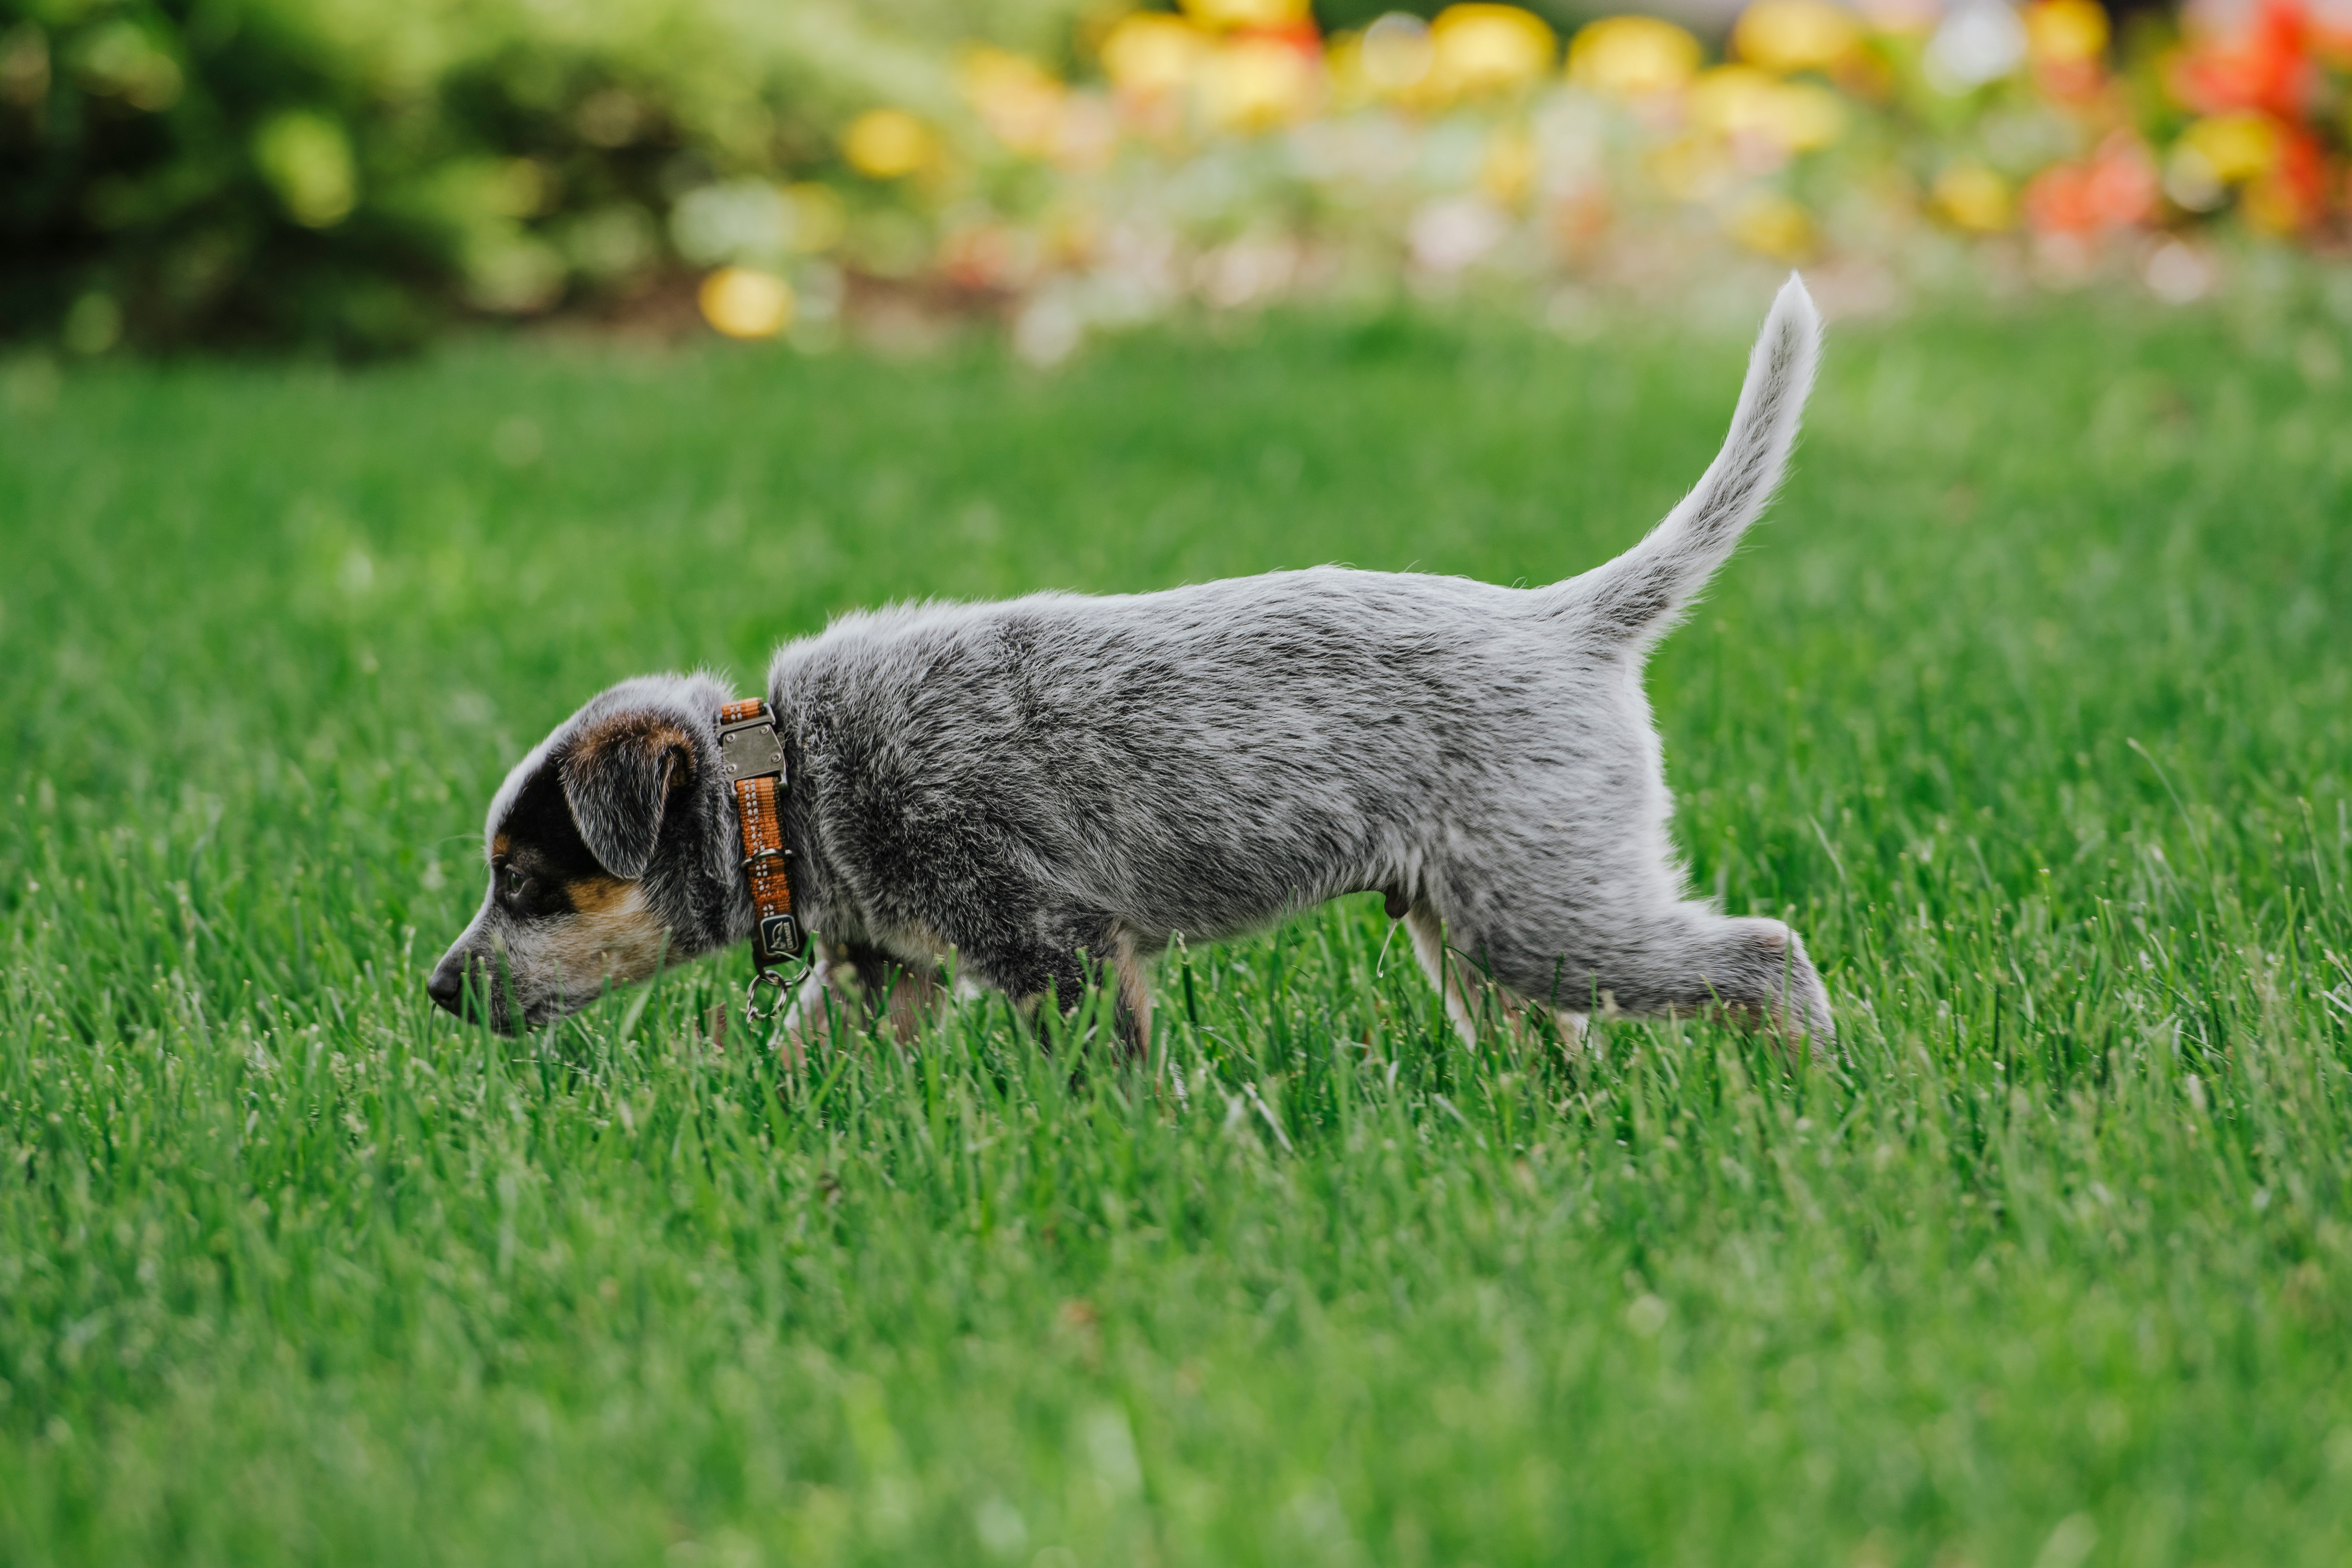 grey and white short coat small dog walking on green grass field during daytime